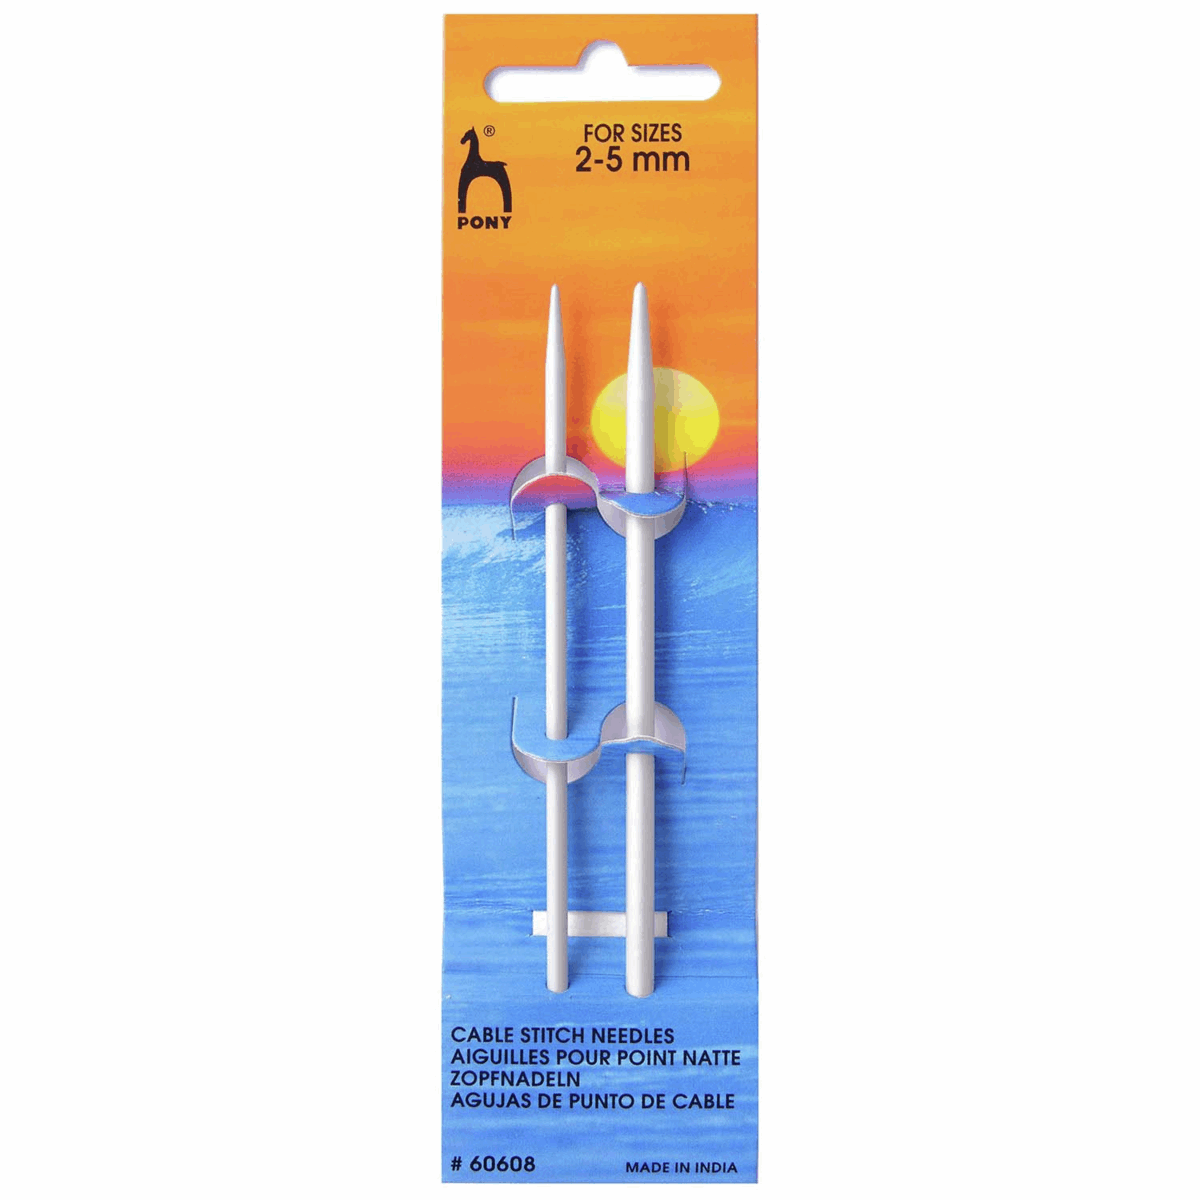 CABLE STITCH NEEDLES - Sizes 3mm & 4mm